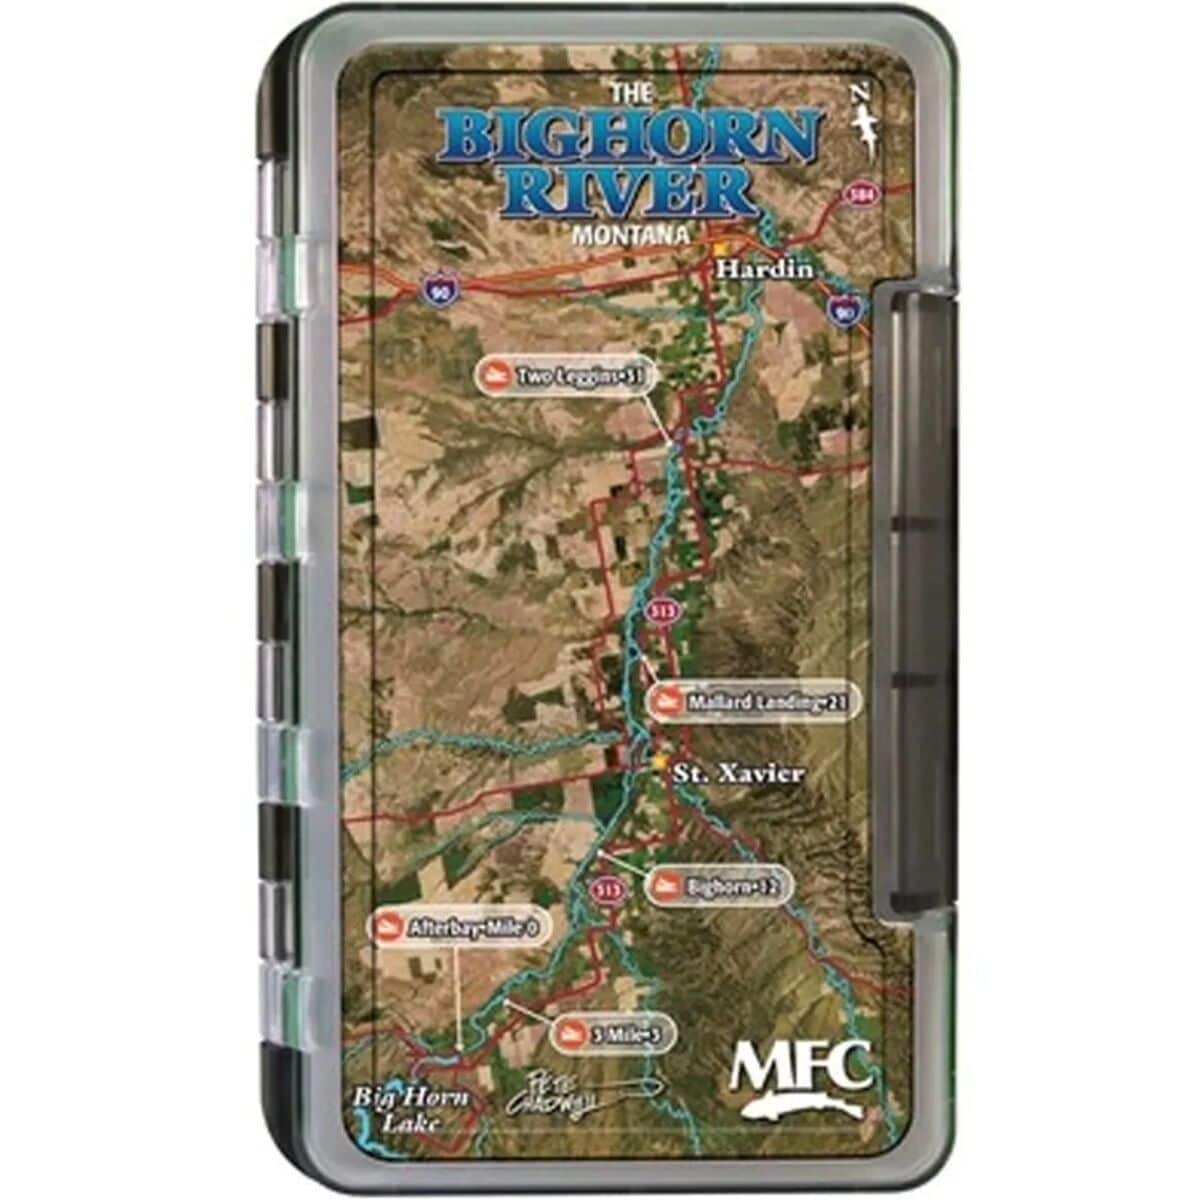 Montana Fly Company Waterproof Fly Box Bighorn River Map, Large